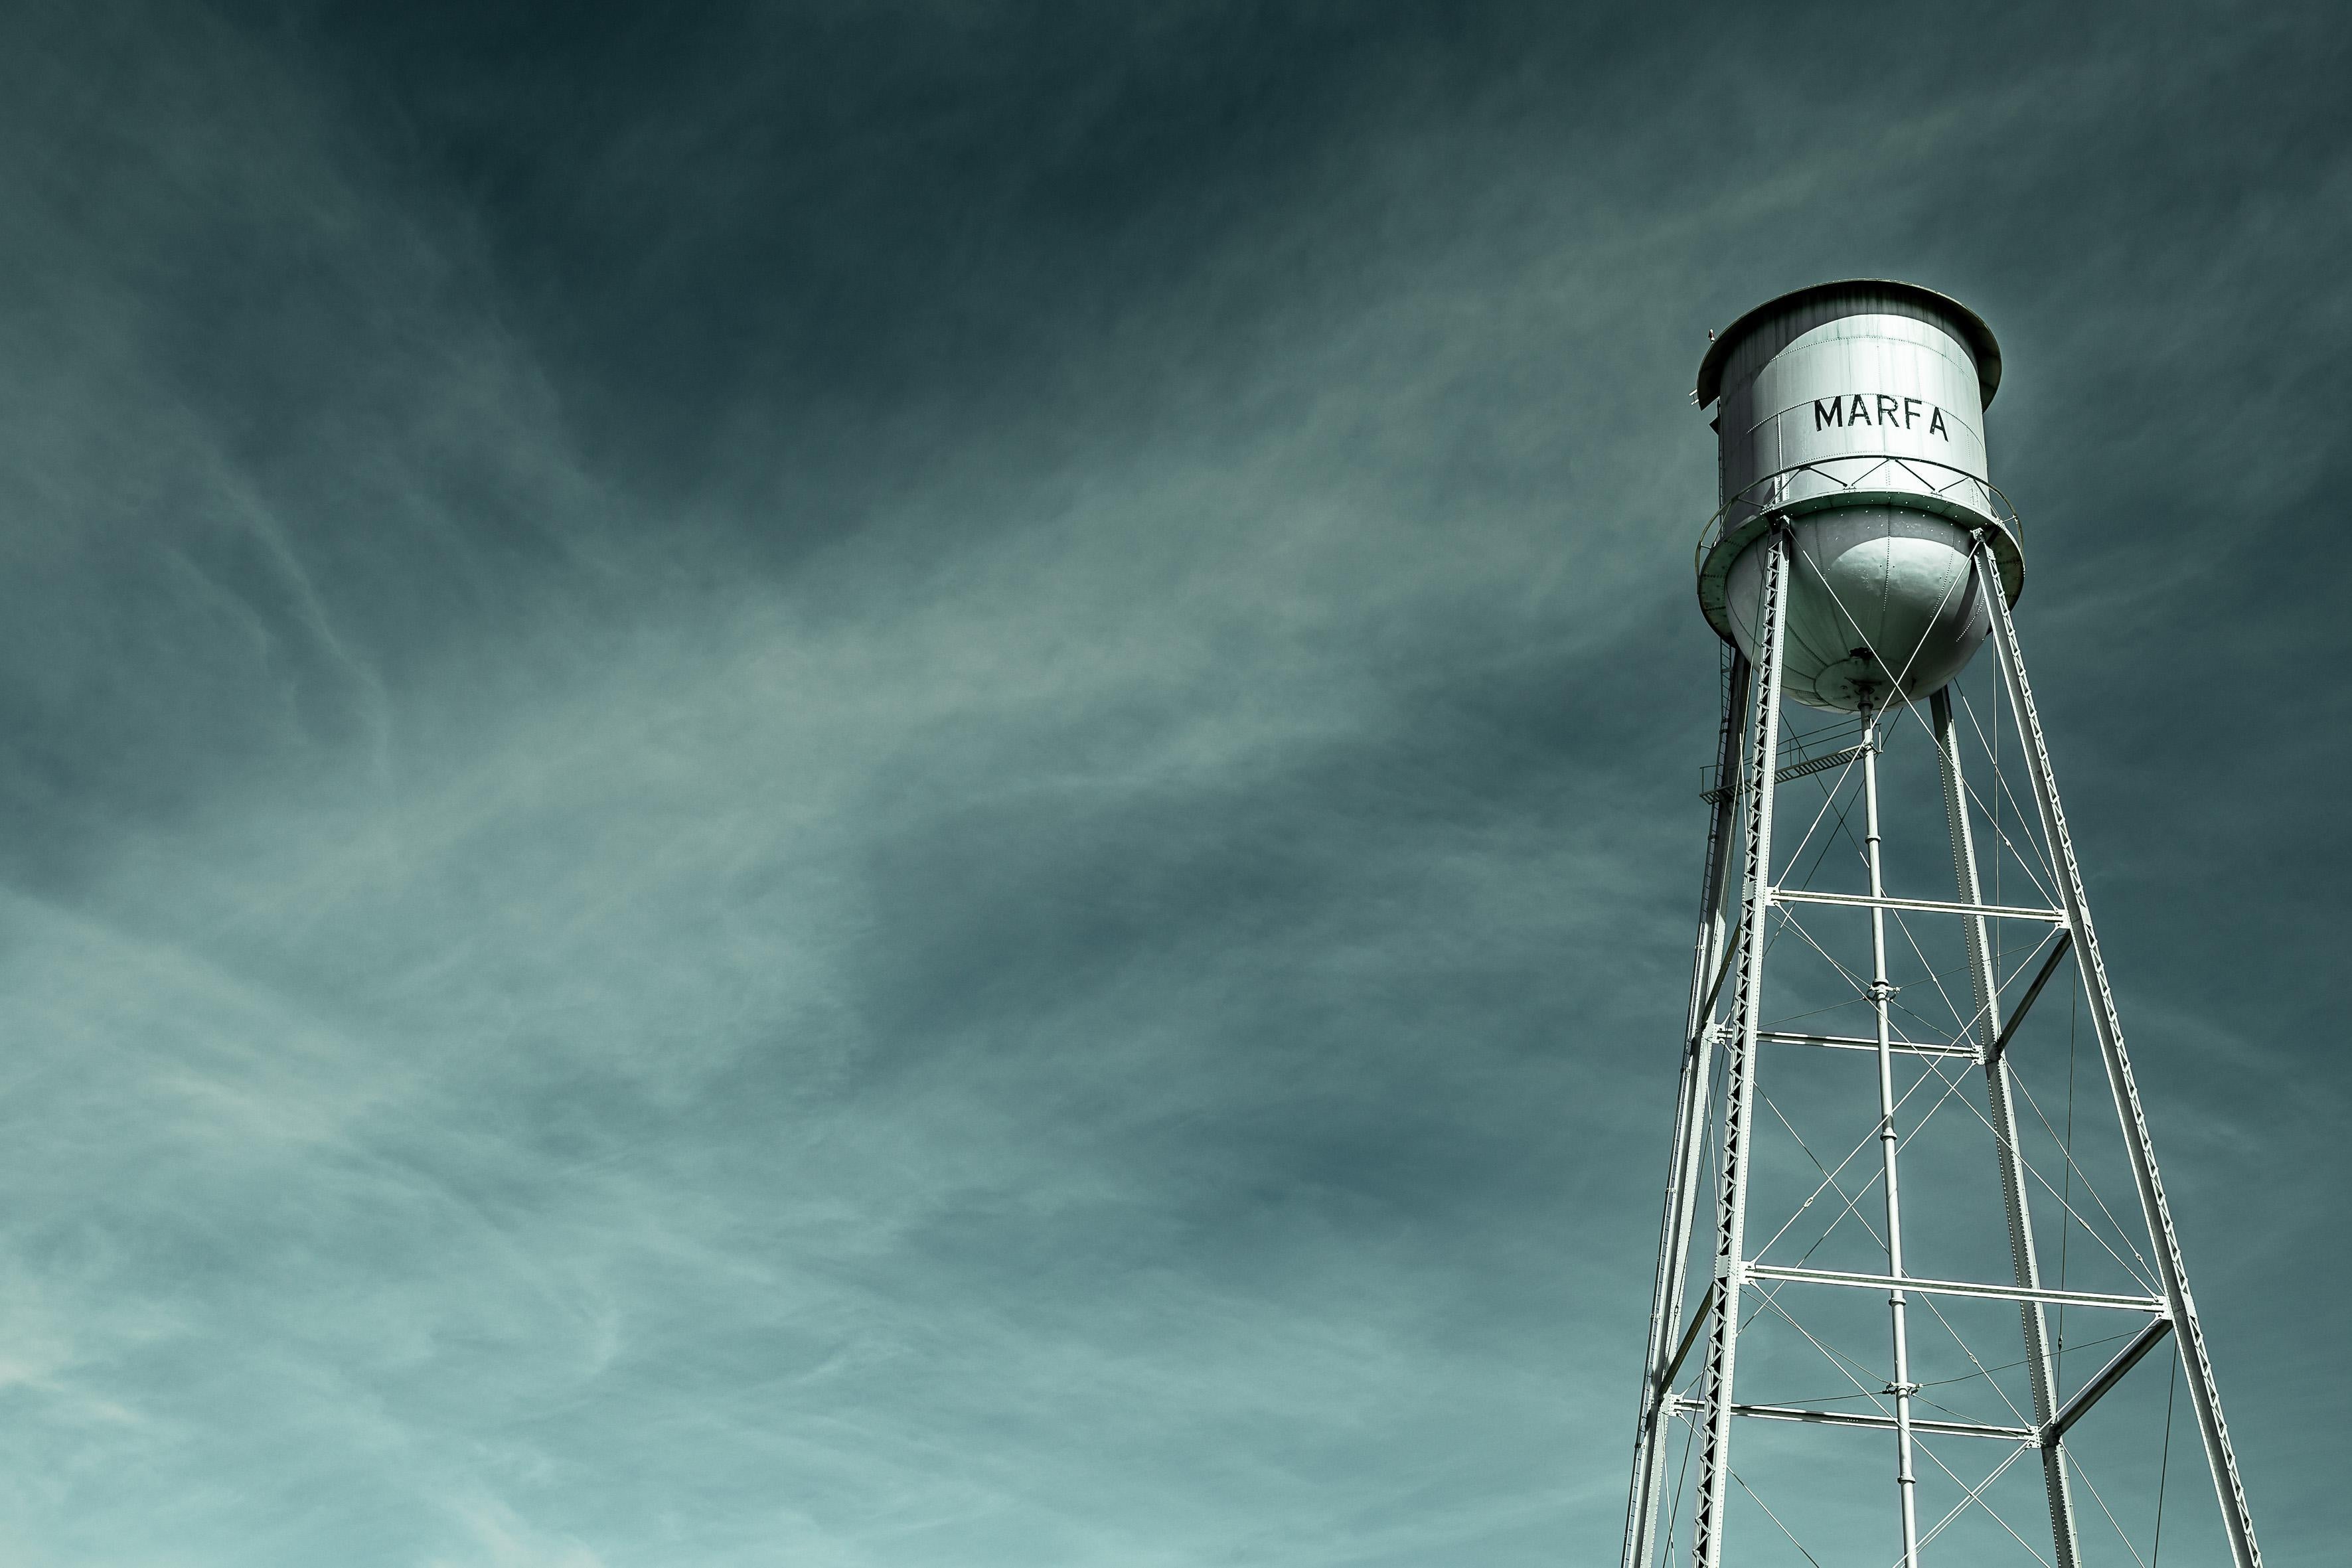 Marfa Texas Water Tower - Photography by Pico Garcez